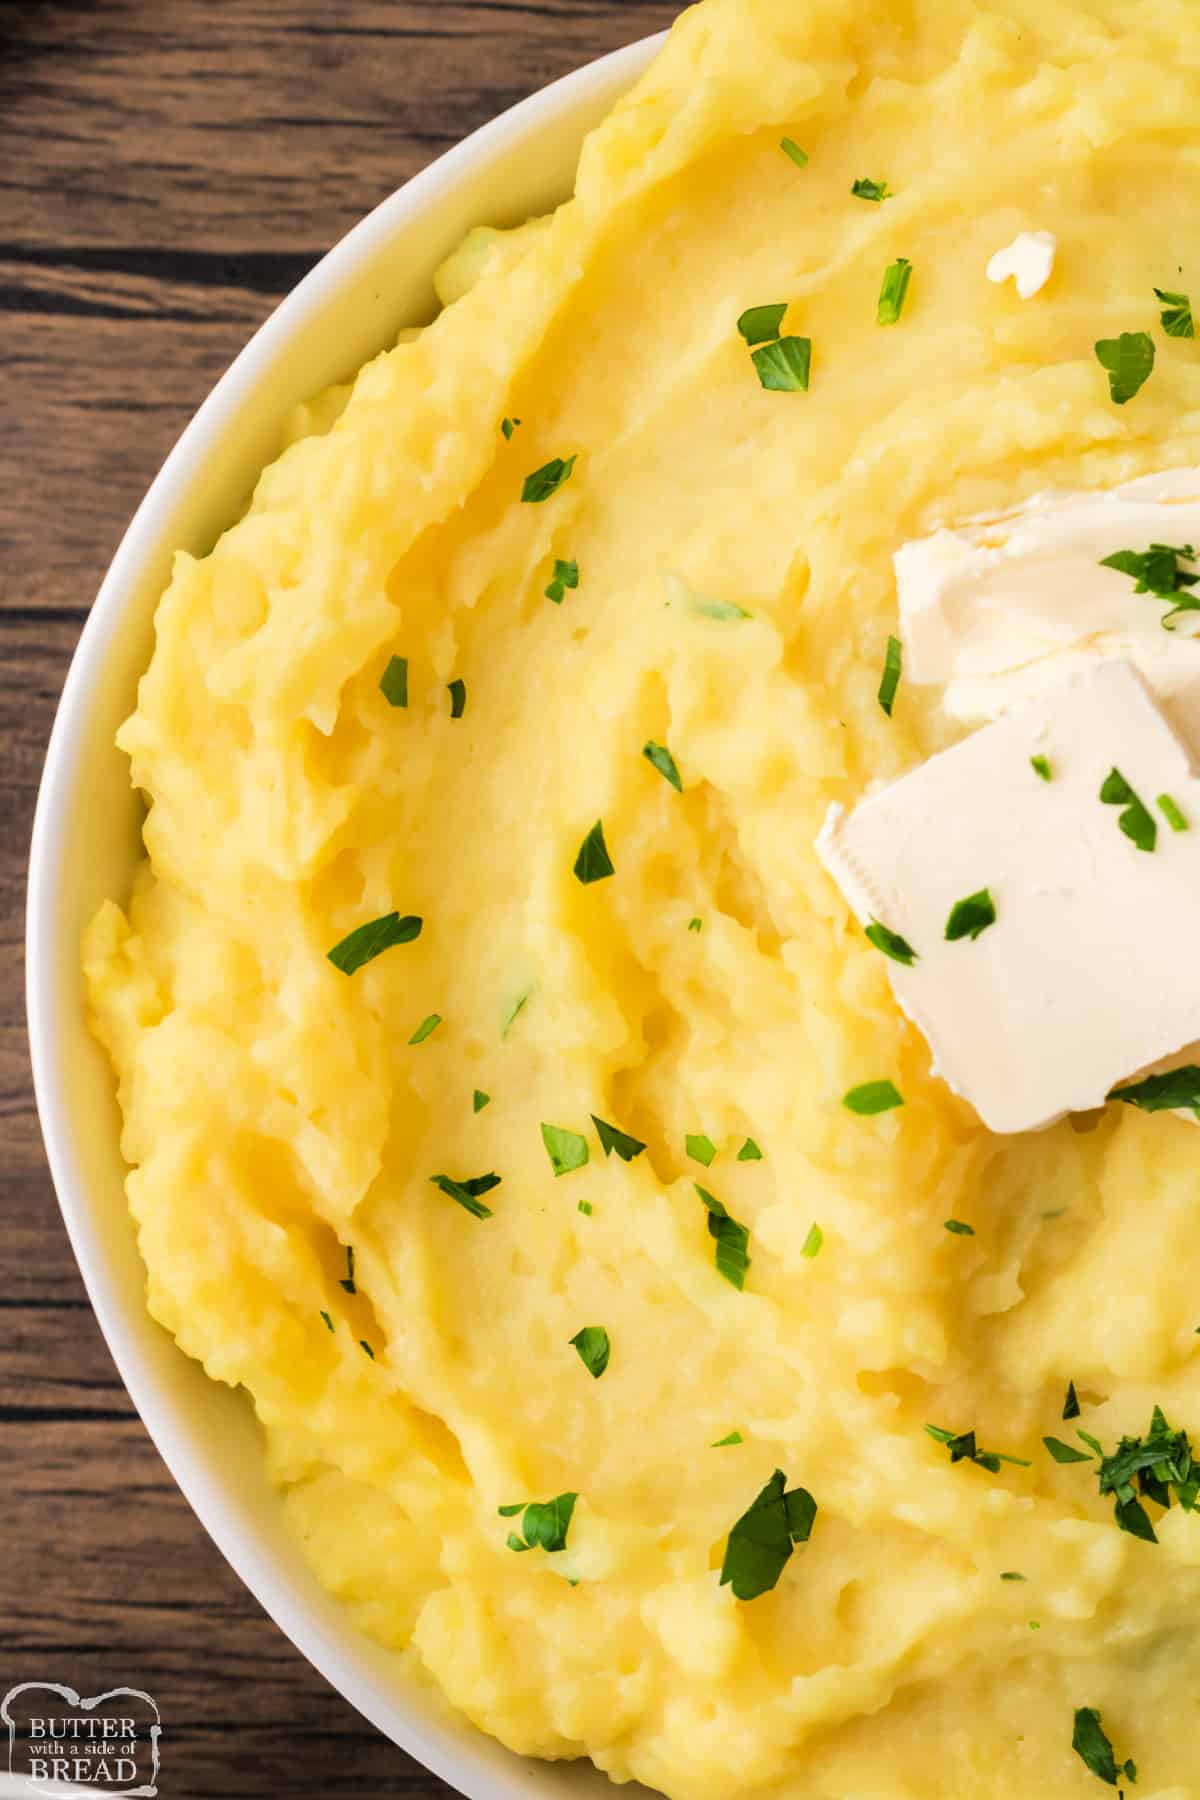 Mashed potatoes with butter and parsley